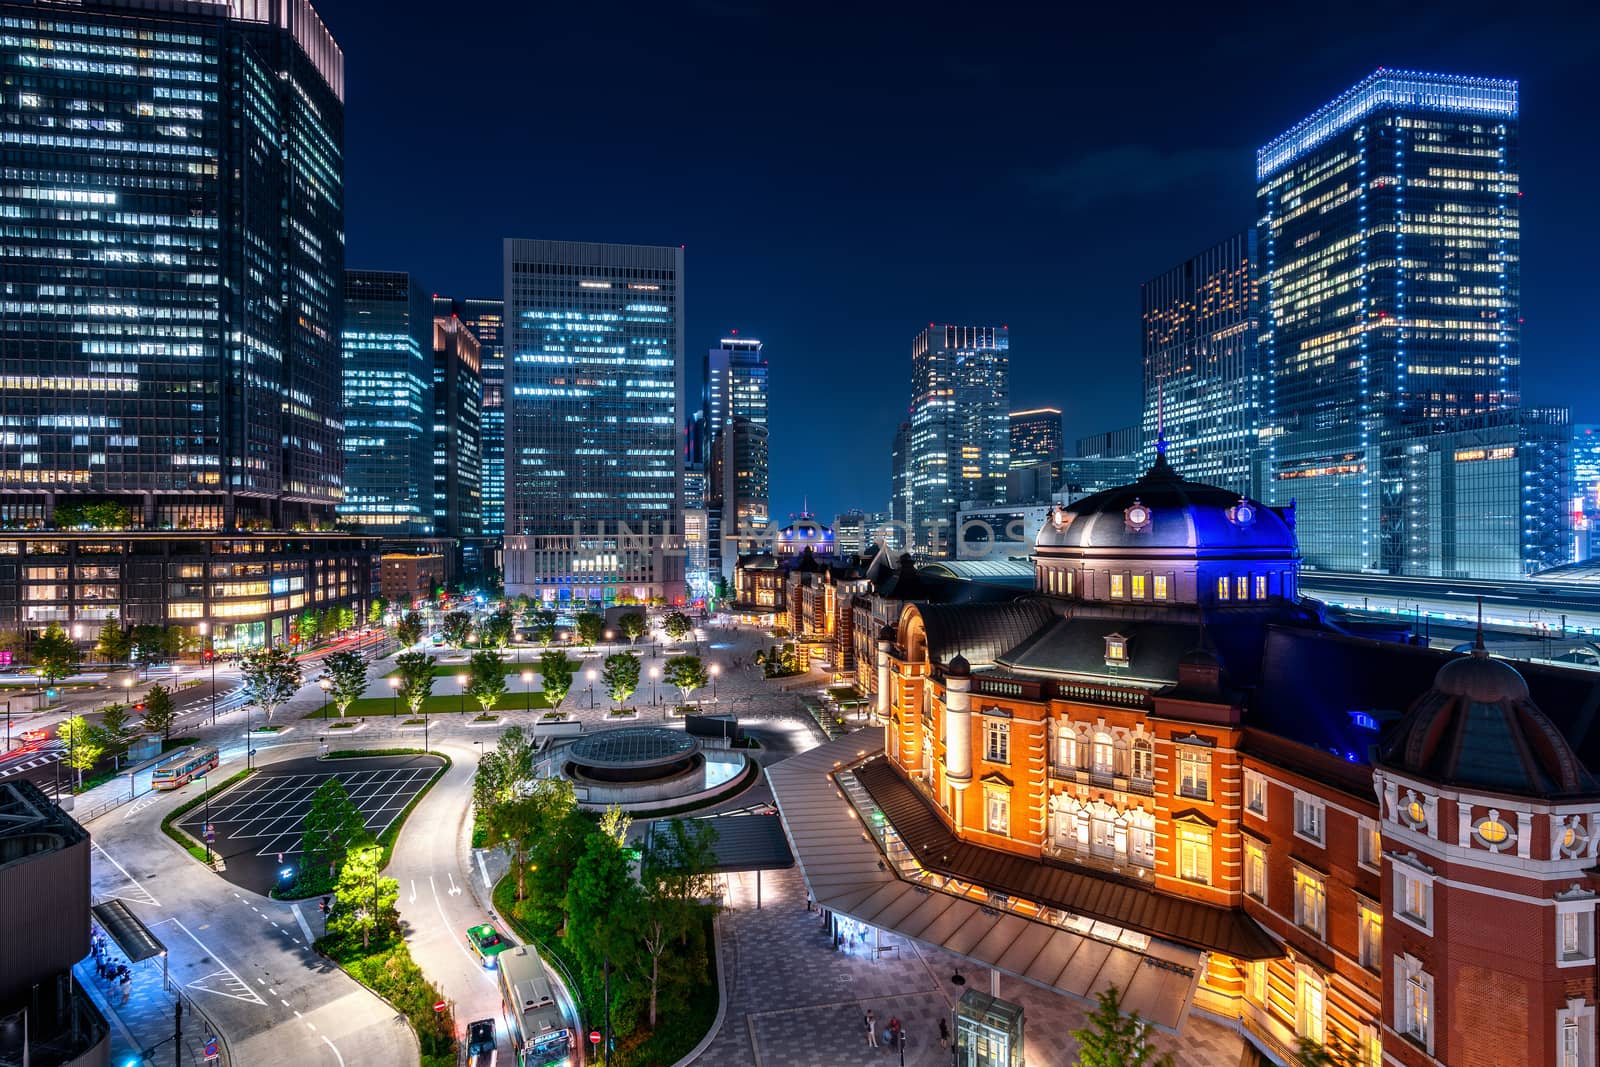 Tokyo railway station and business district building at night, Japan. by gutarphotoghaphy